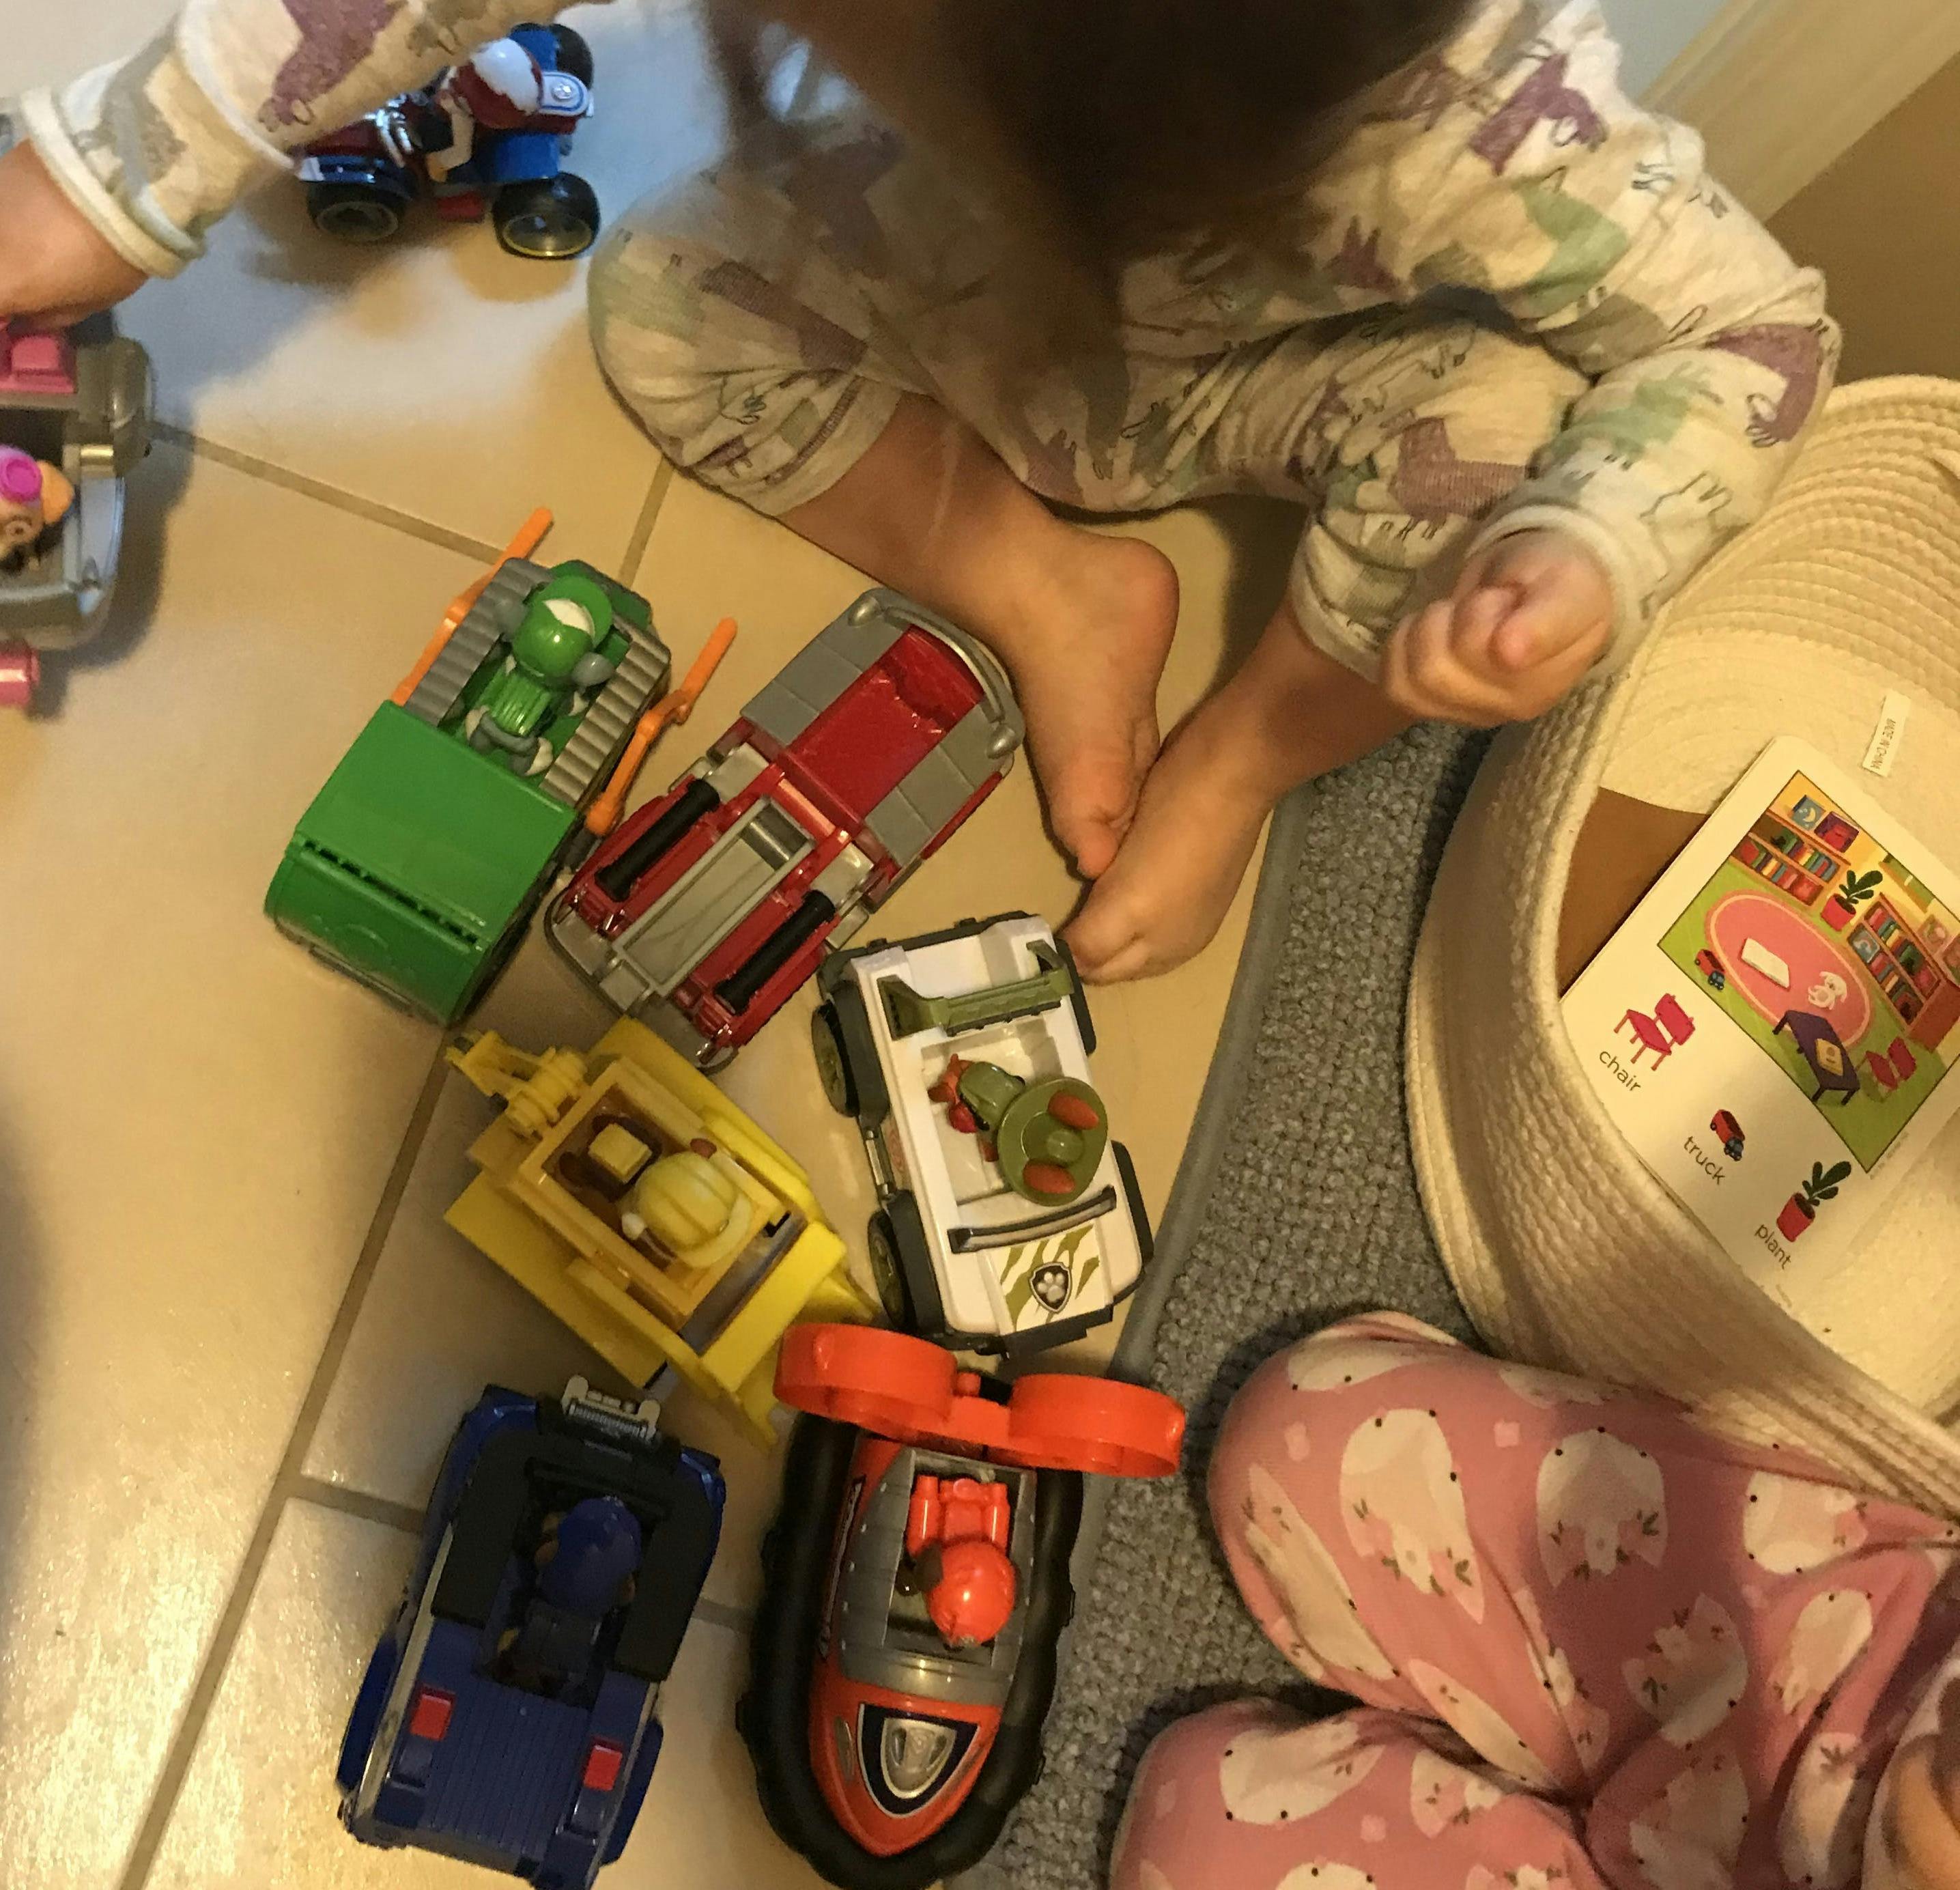 toddler girl playing with Skye from Paw Patrol with all other Paw Patrol toys strewn about, second girl sitting next to a basket with a magazine inside